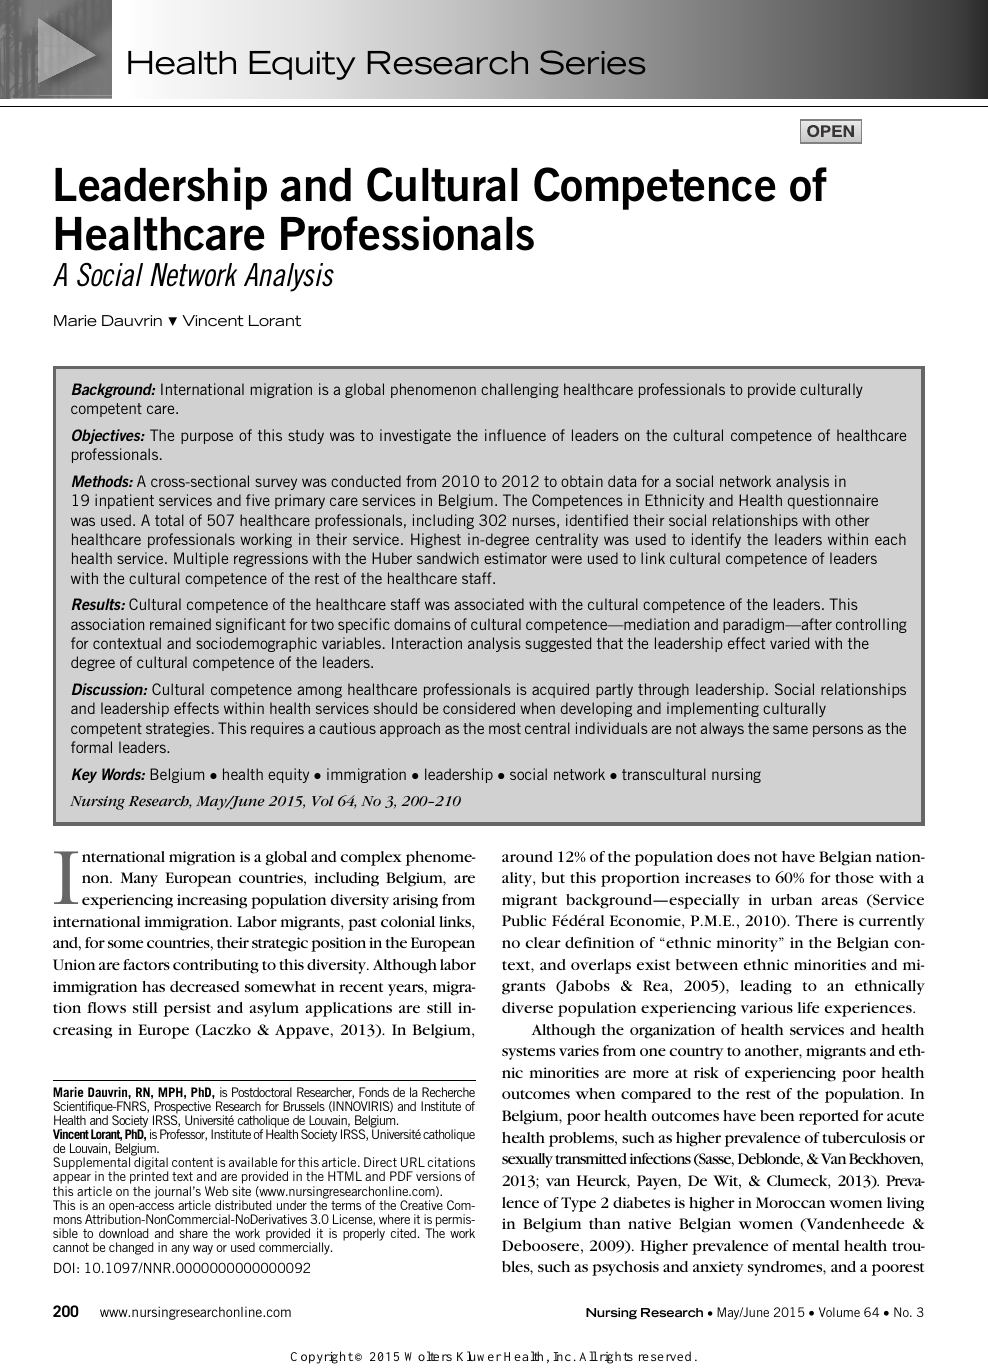 Personality of Belgian physicians in a clinical leadership program, BMC  Health Services Research